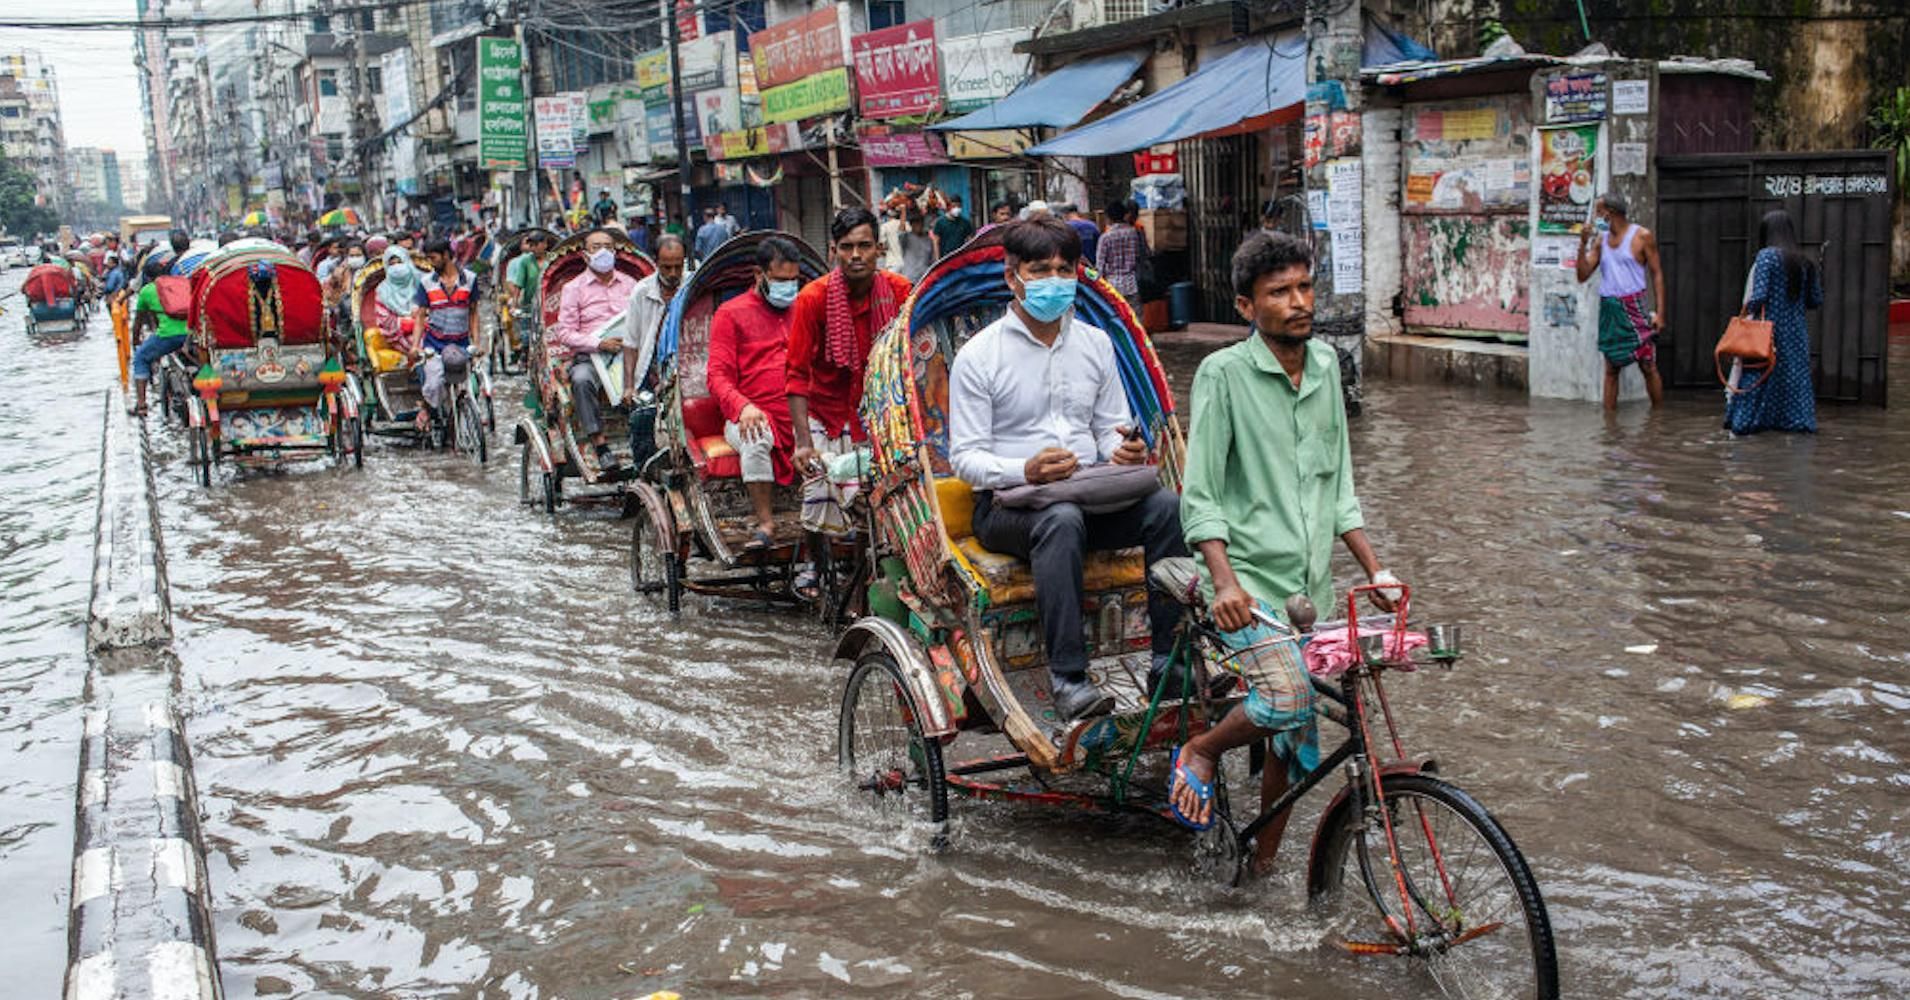 Commuters in Dhaka, Bangladesh contend with floodwaters following heavy rains on October 12, 2020. (Photo: Nayan Kar/SOPA Images/LightRocket/Getty Images)